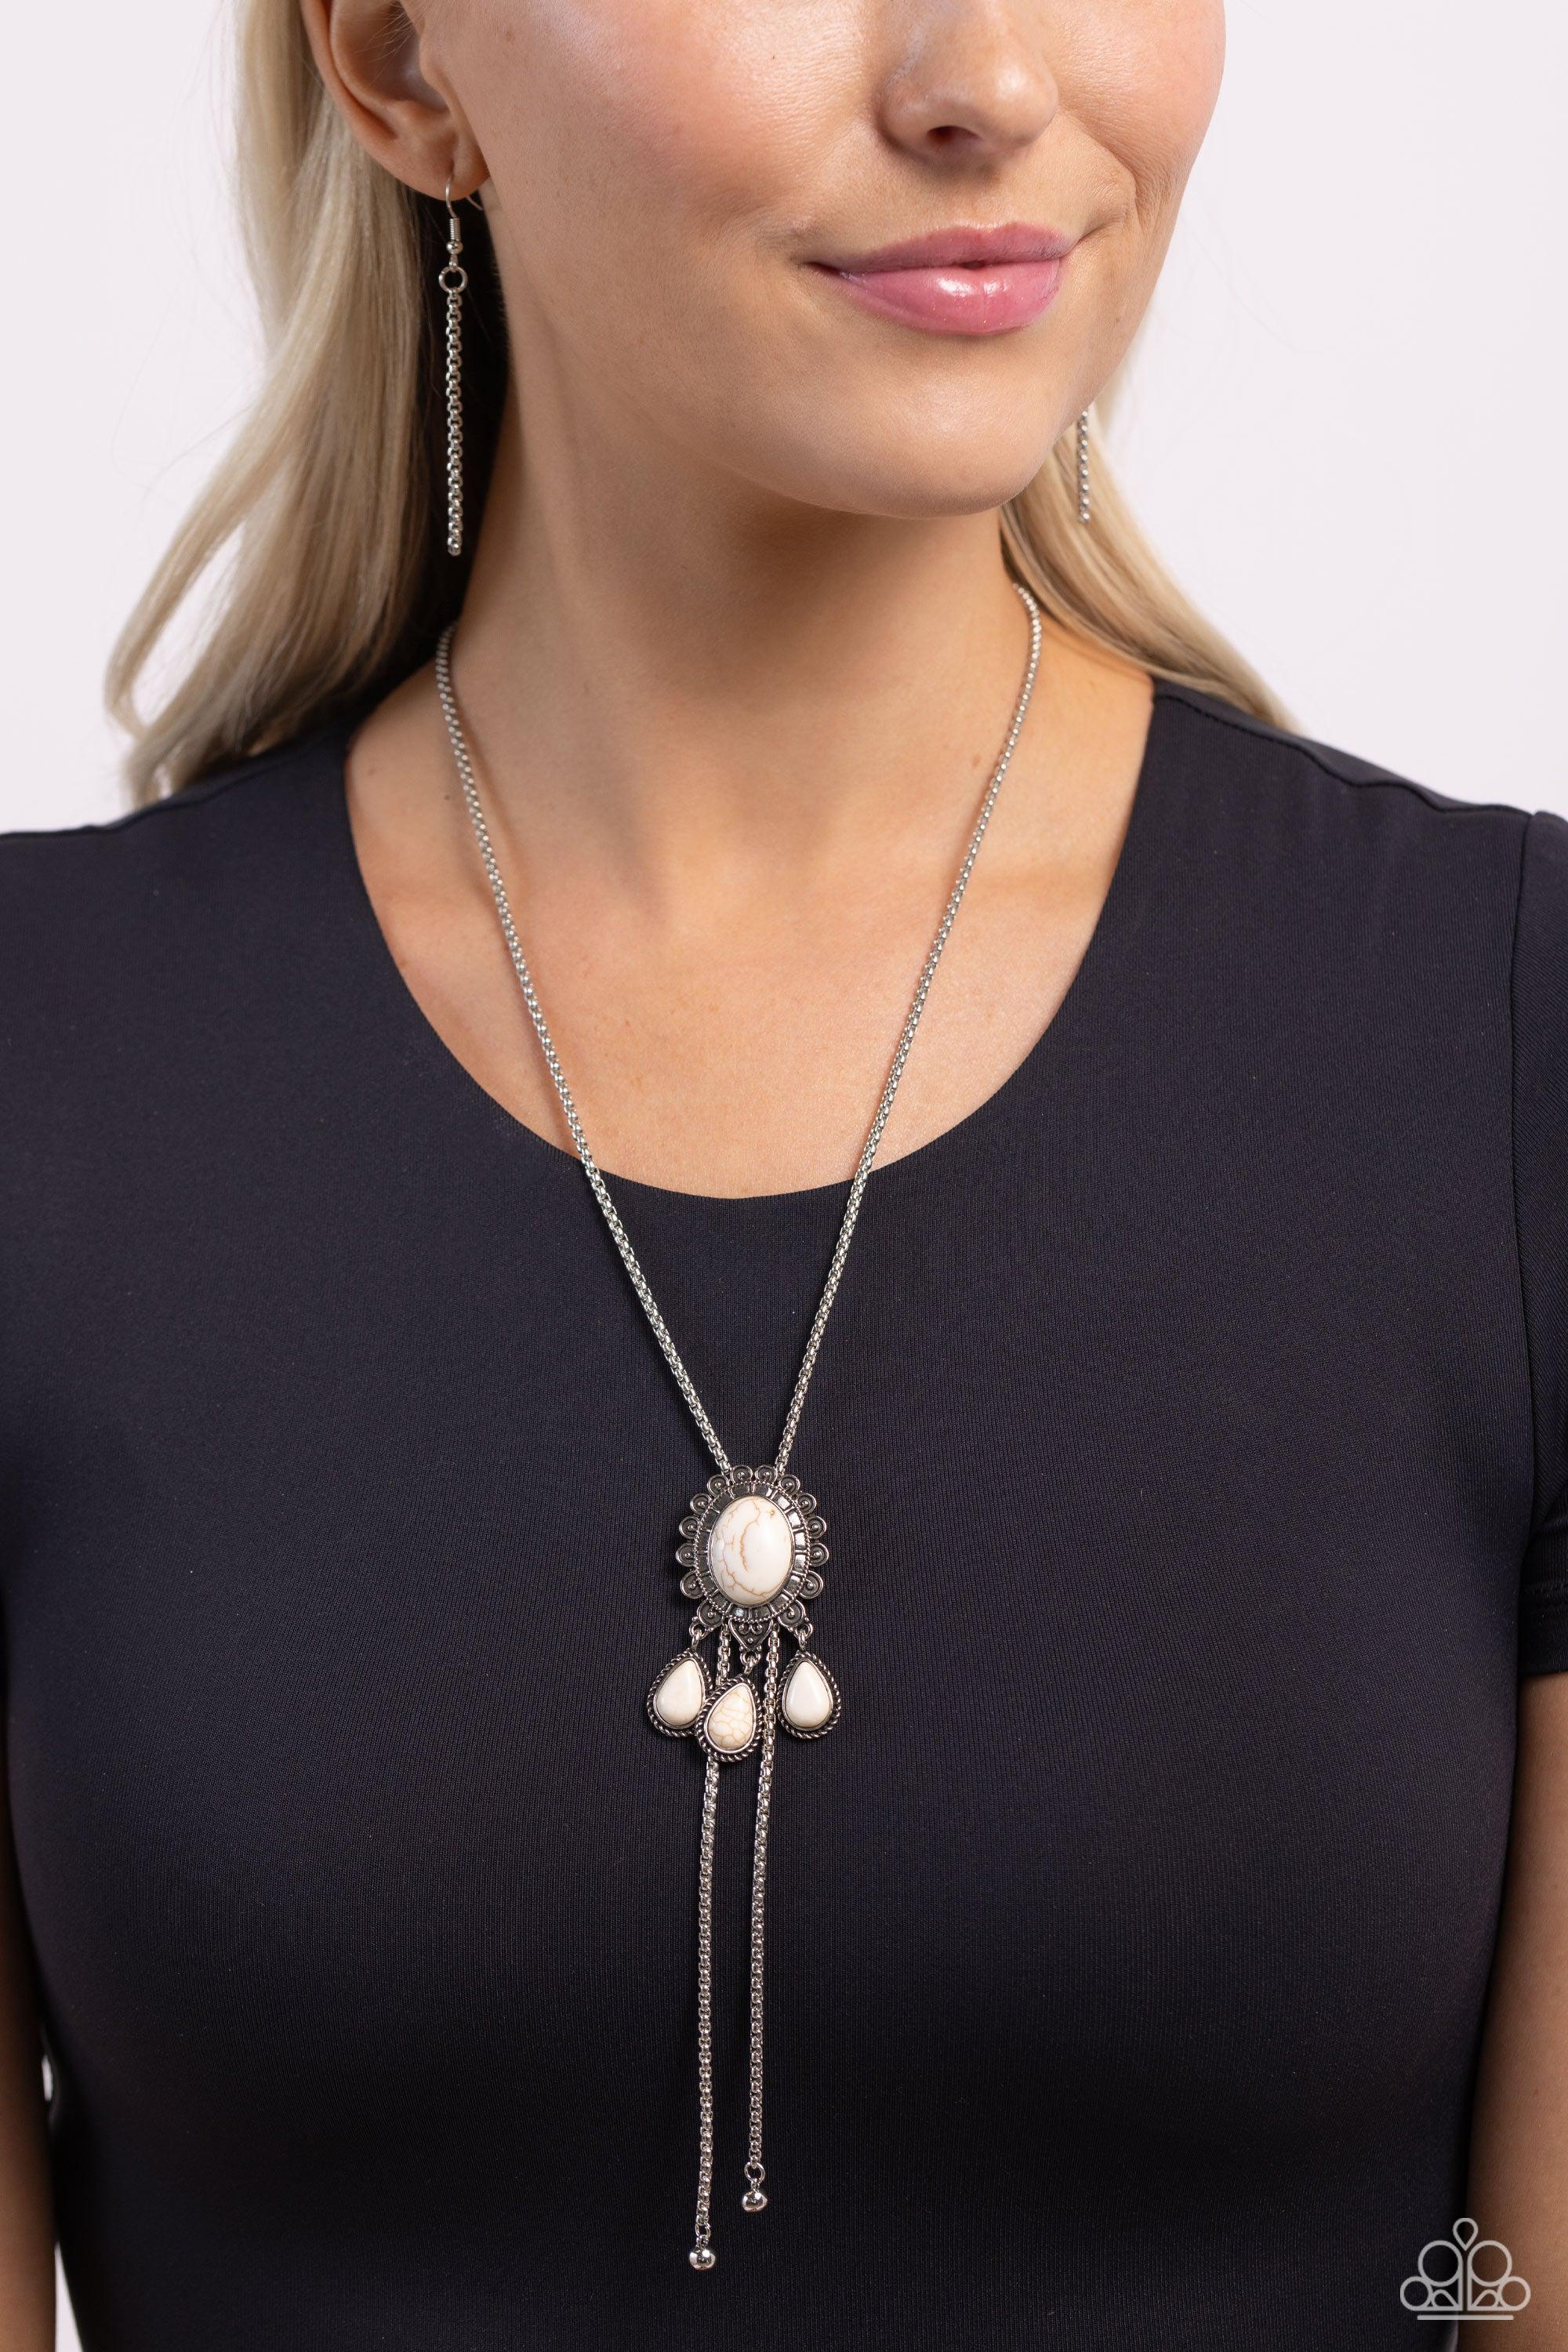 Seize the Serenity White Stone Bolo Necklace - Paparazzi Accessories- lightbox - CarasShop.com - $5 Jewelry by Cara Jewels